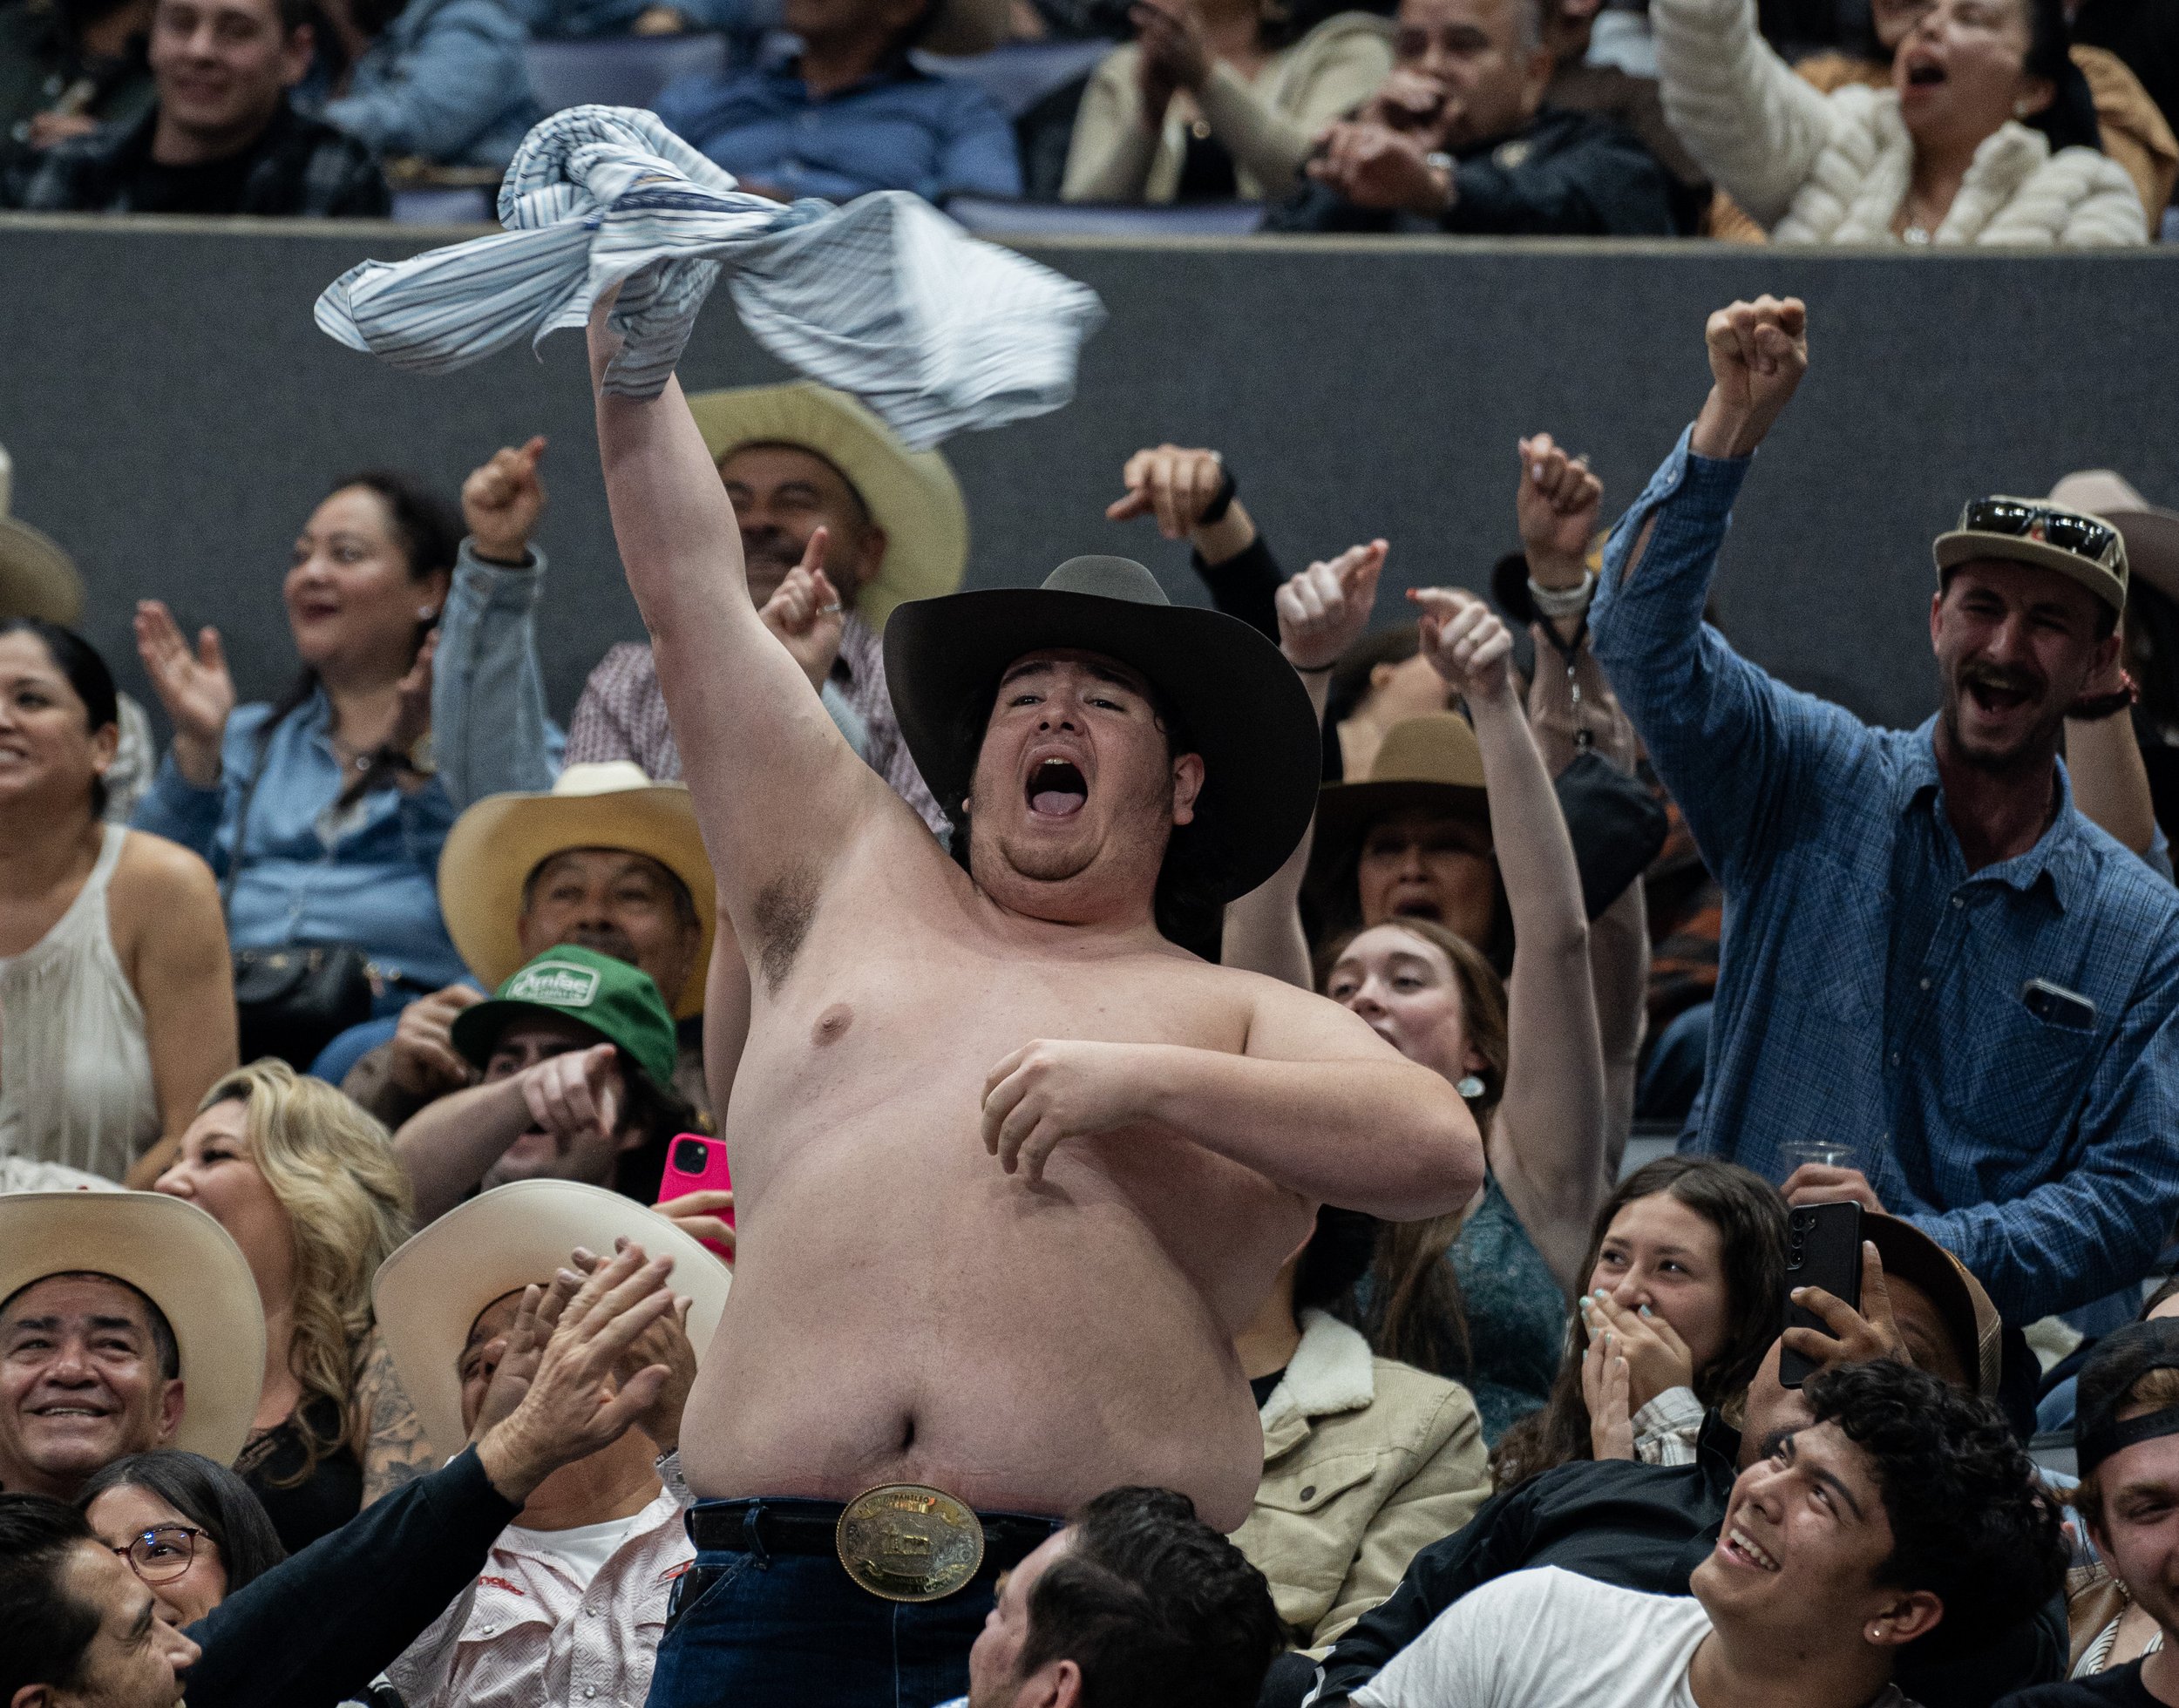  Shirtless man dancing to country music in the stans of Crypto.com Arena in Los Angeles, Calif. on Saturday, Feb. 16, 2023. (Danilo Perez | The Corsair) 